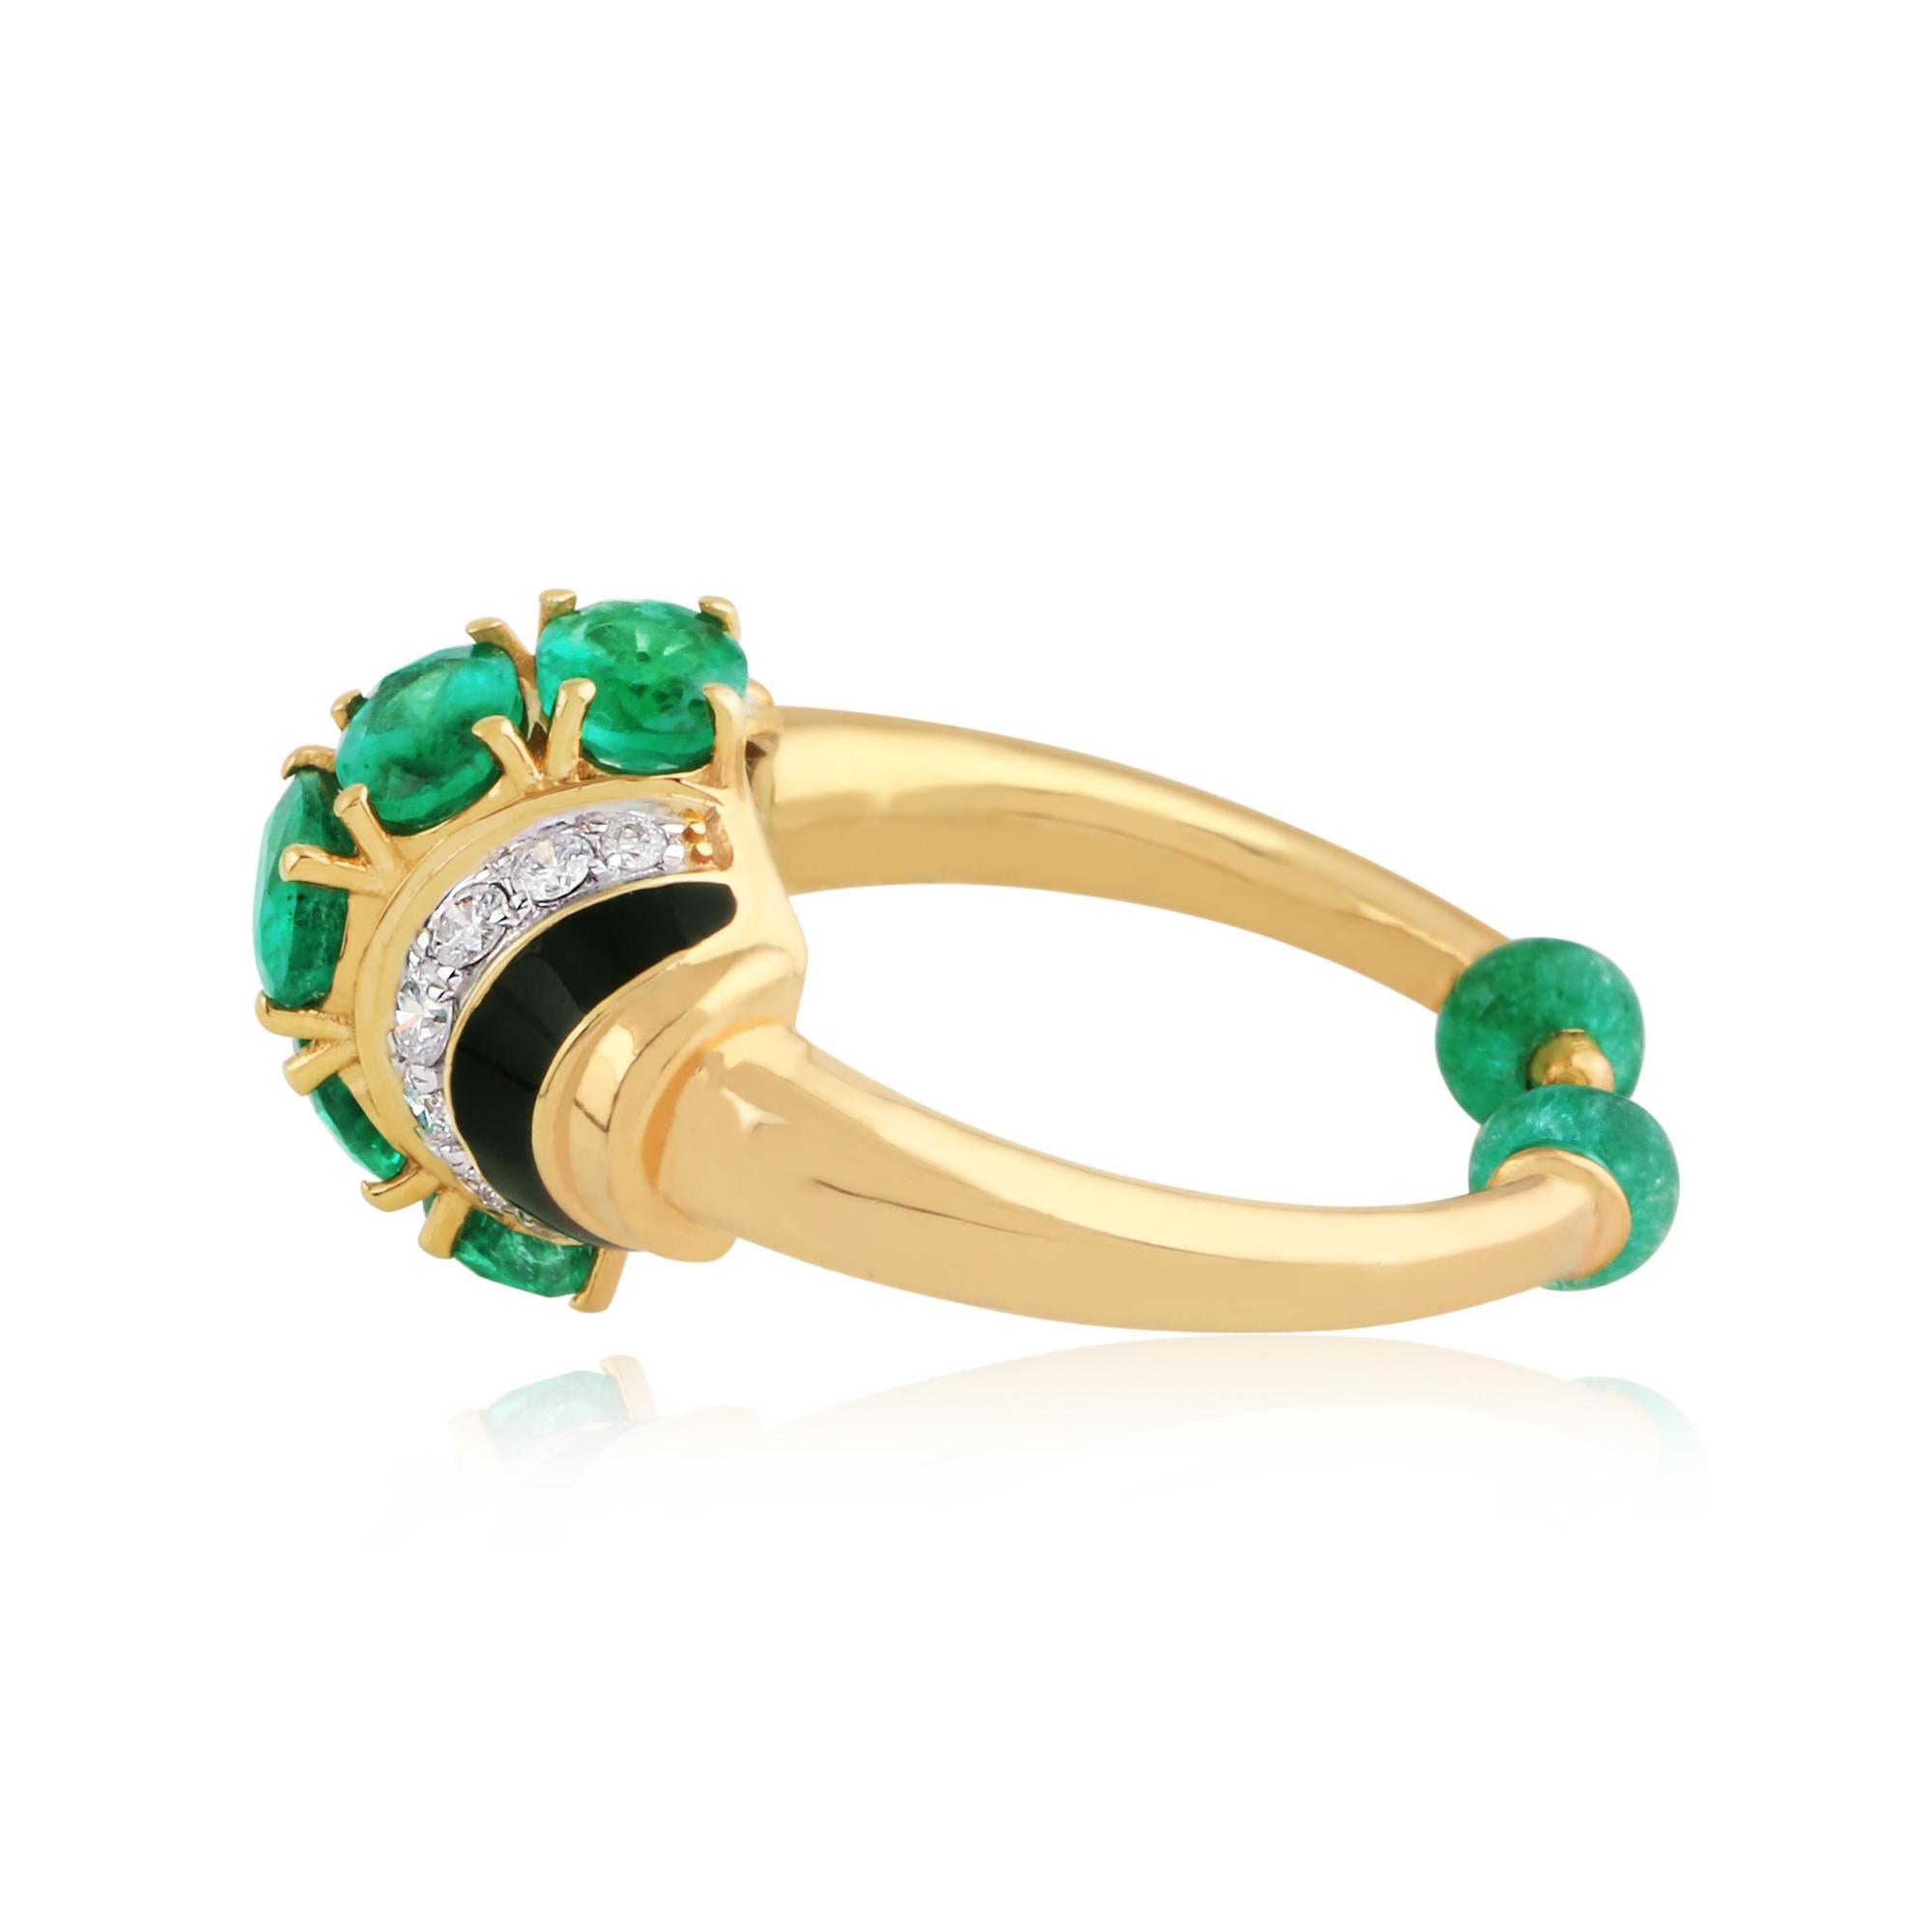 Item Code :- CN-32195
Gross Wt. :- 5.77 gm
18k Solid Yellow Gold Wt. :- 5.14 gm
Natural Diamond Wt. :- 0.30 Ct. ( SI Clarity & HI Color )
Oval Emerald Wt. :- 1.86 Ct.
Ring Size :- 7 US & All size available

✦ Sizing
.....................
We can